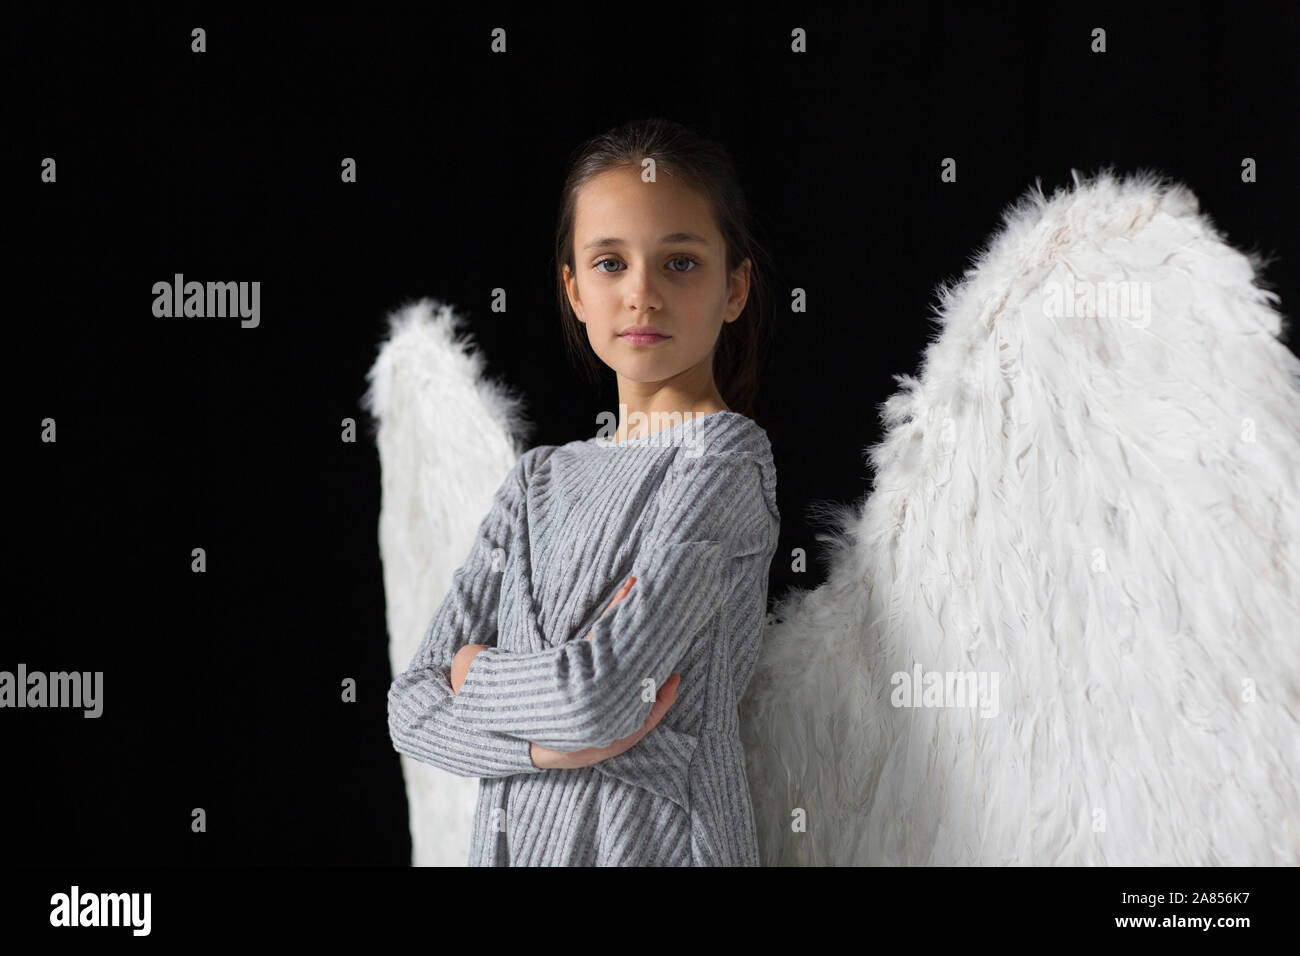 Portrait confident, brave girl wearing angel wings Stock Photo